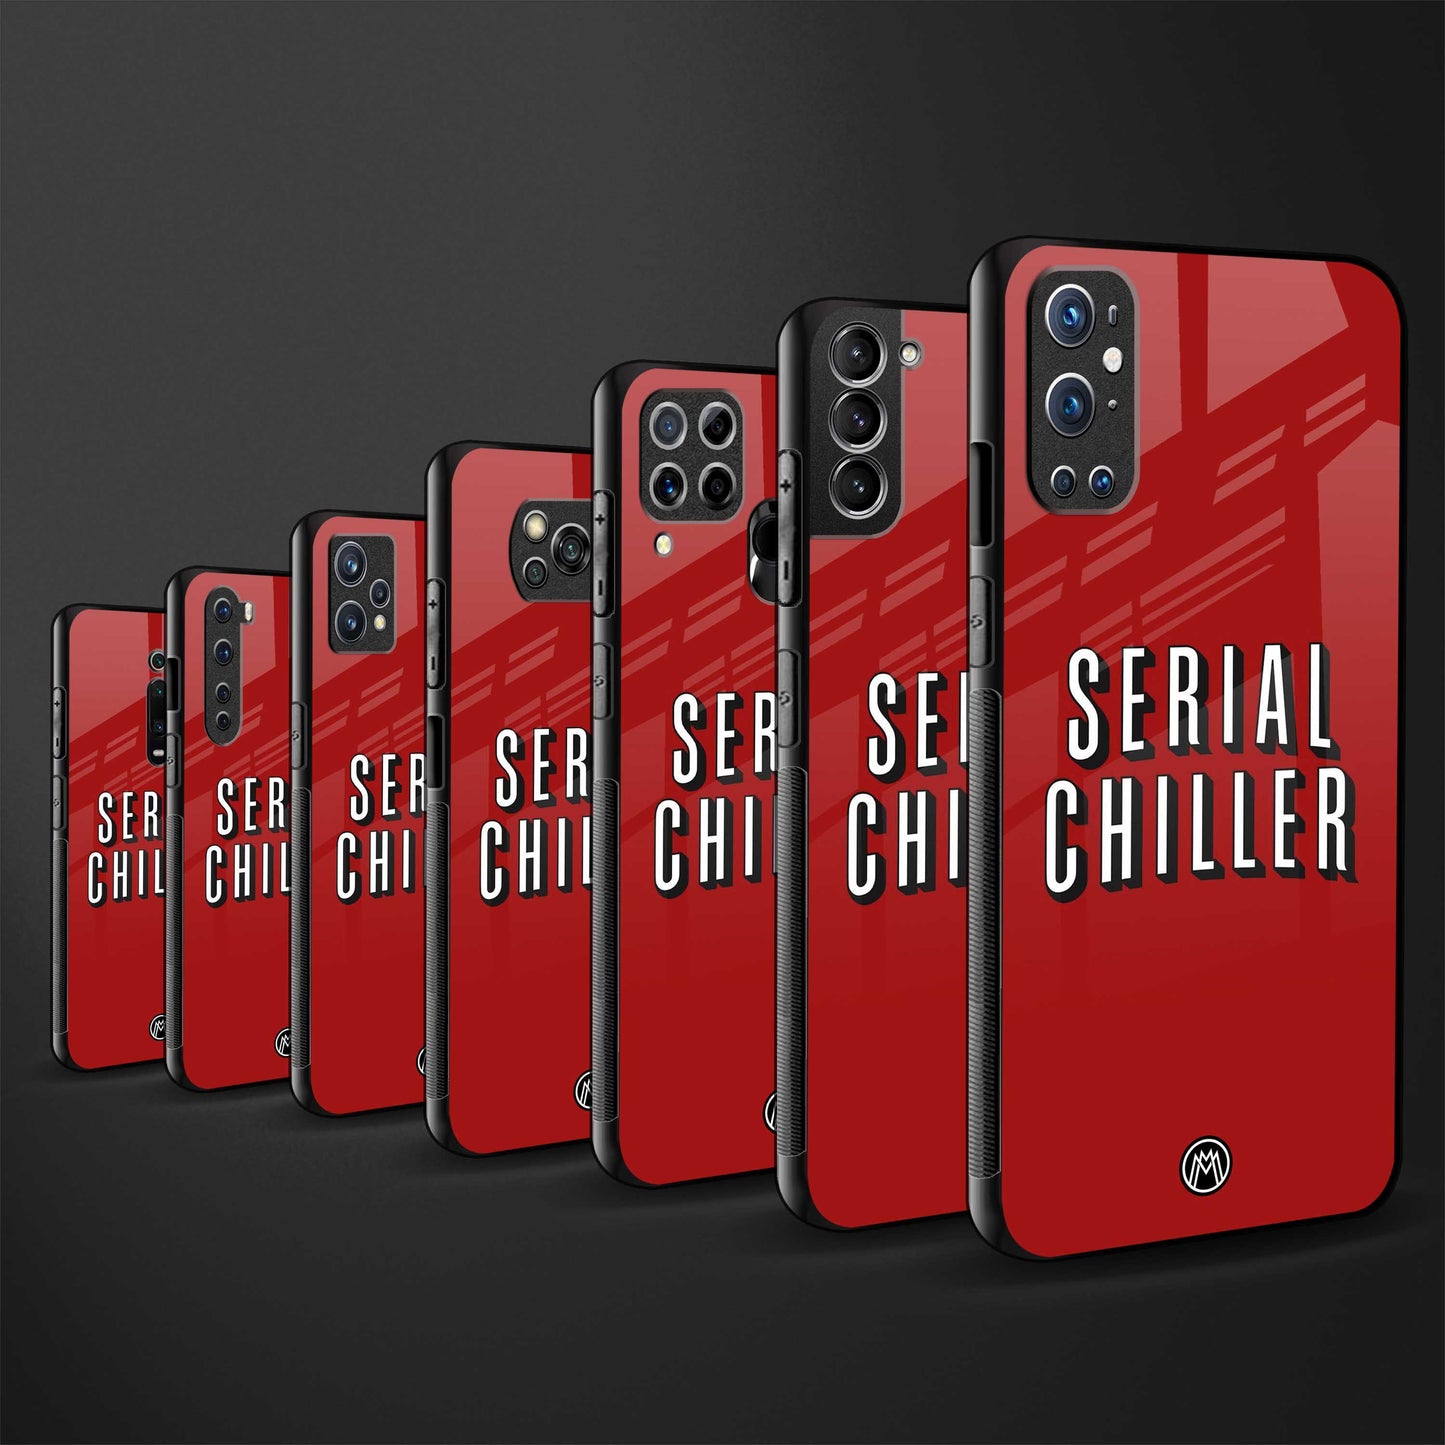 serial chiller netflix glass case for redmi note 7 pro image-3